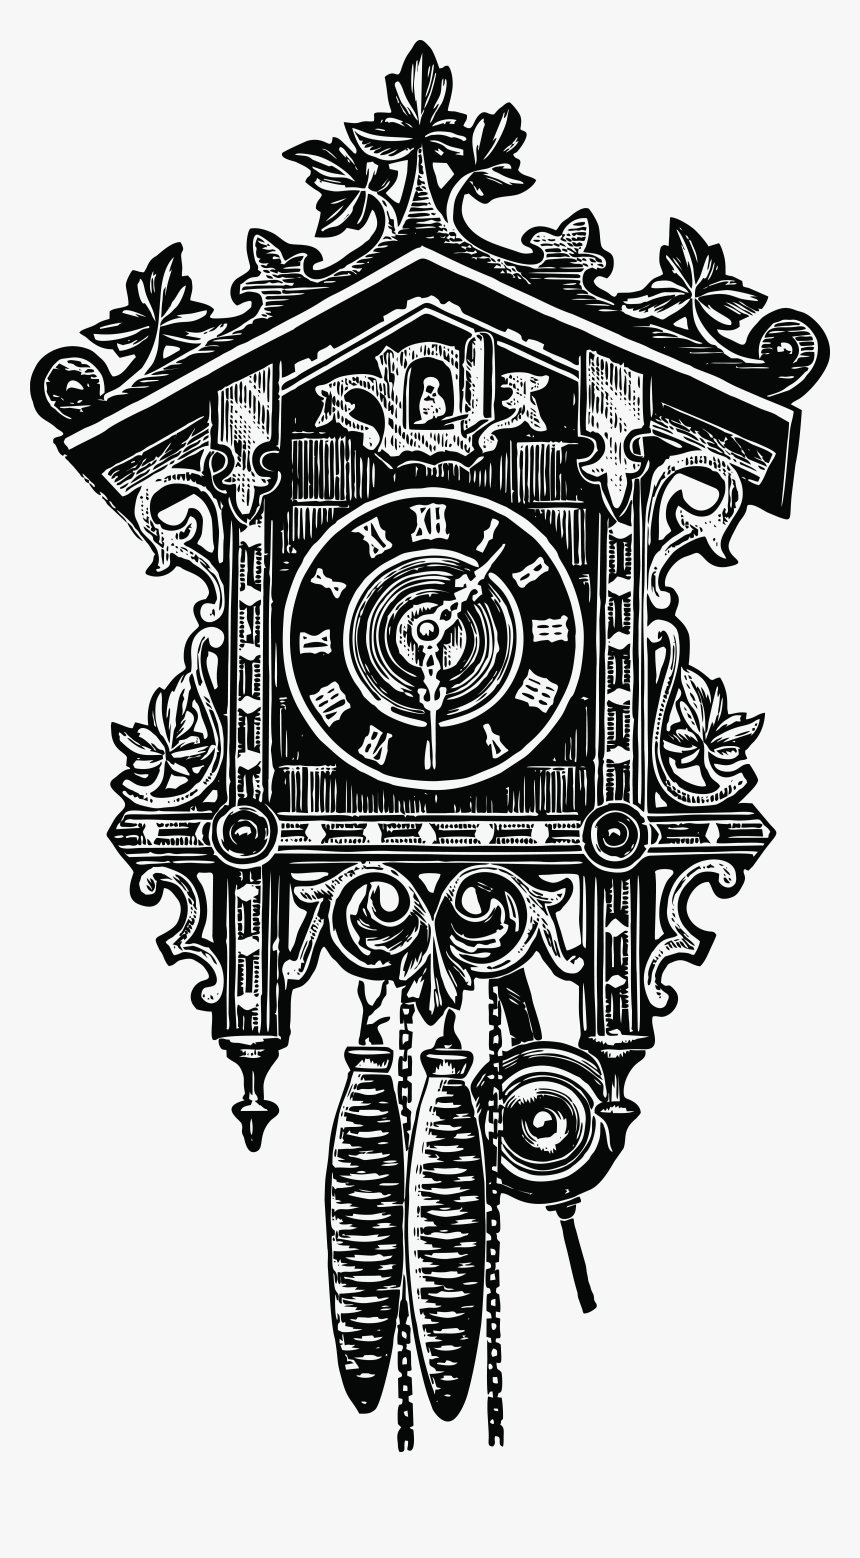 Transparent Clock Clipart Png - Cuckoo Clock Clipart Black White, Png Download, Free Download